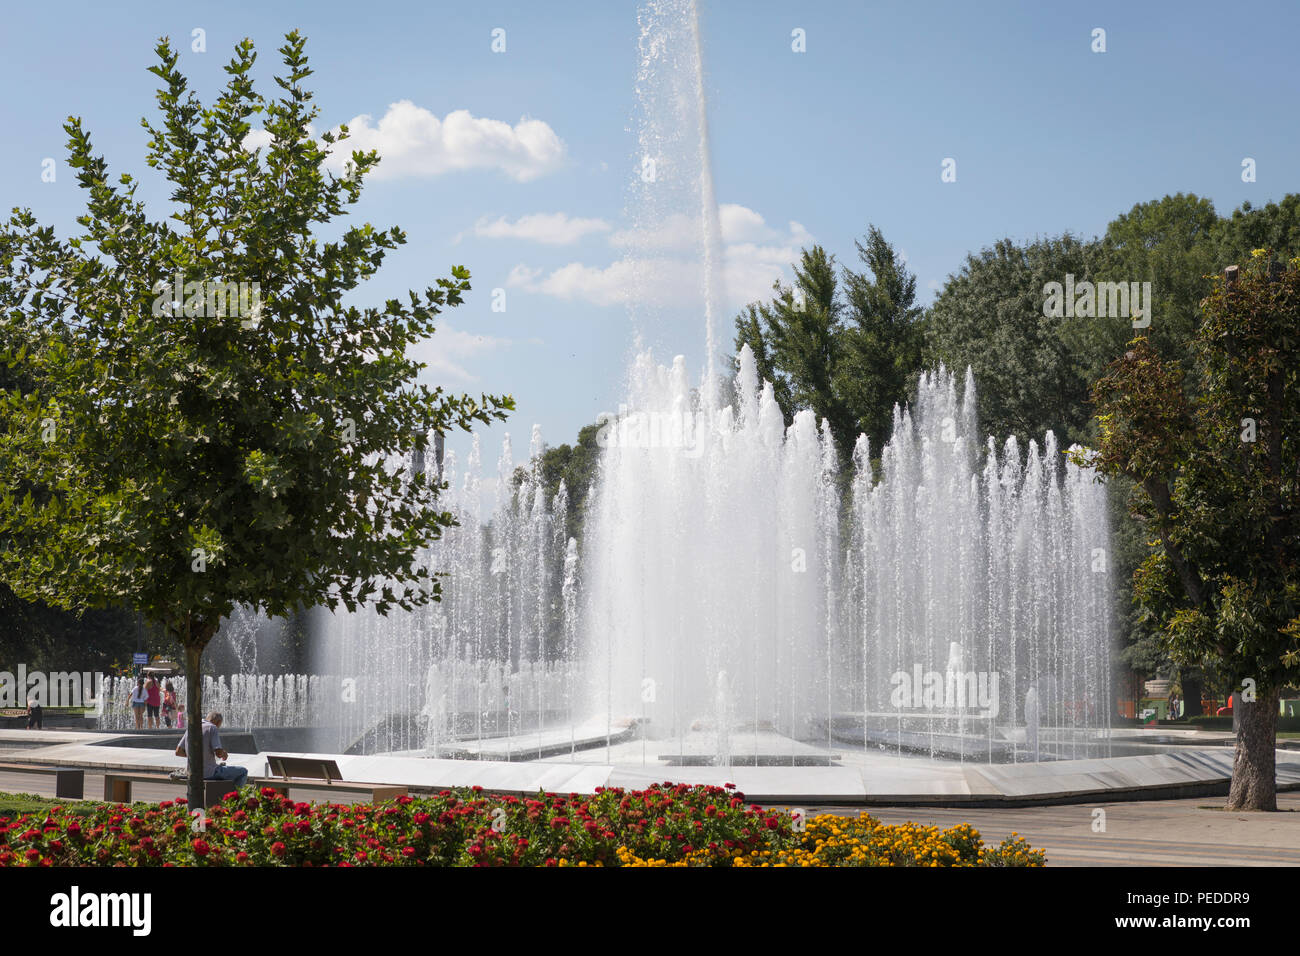 Beautiful fountains squirting water at main square in the inner city of Pleven, Bulgaria Stock Photo